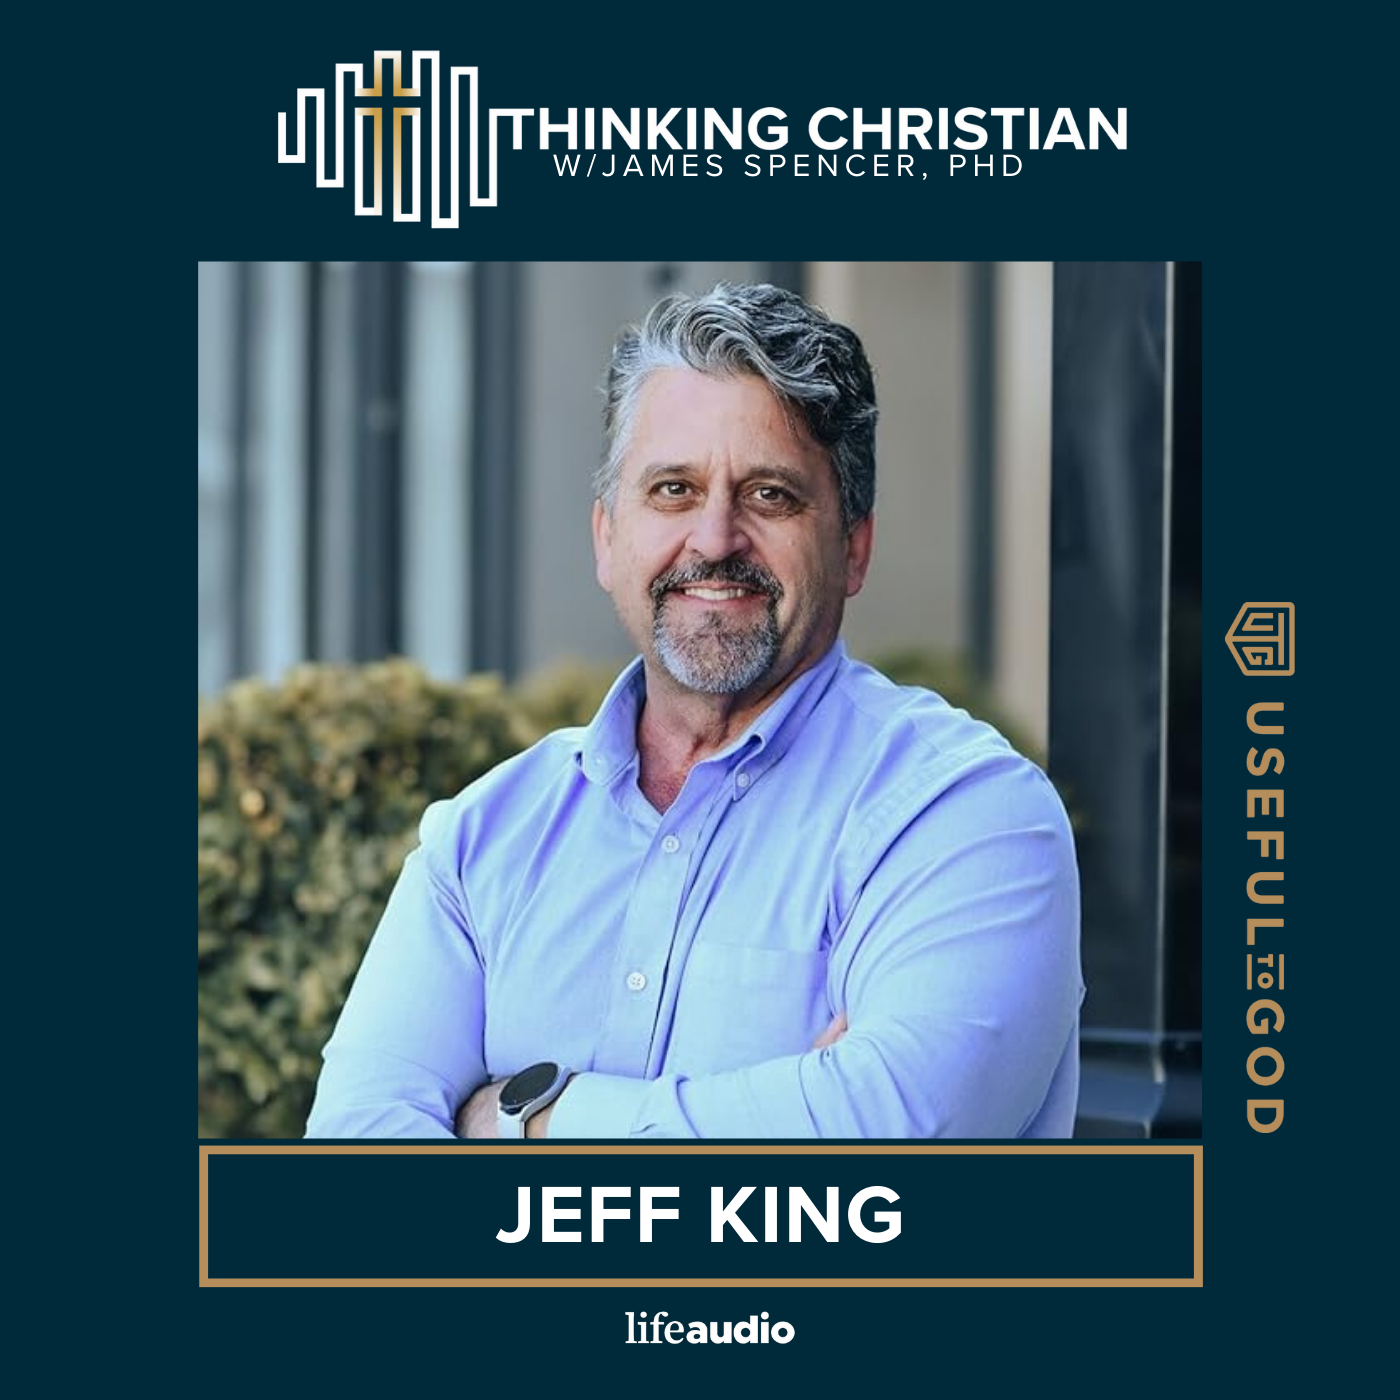 What Can We Learn from the Persecuted Church?- A Conversation with Jeff King